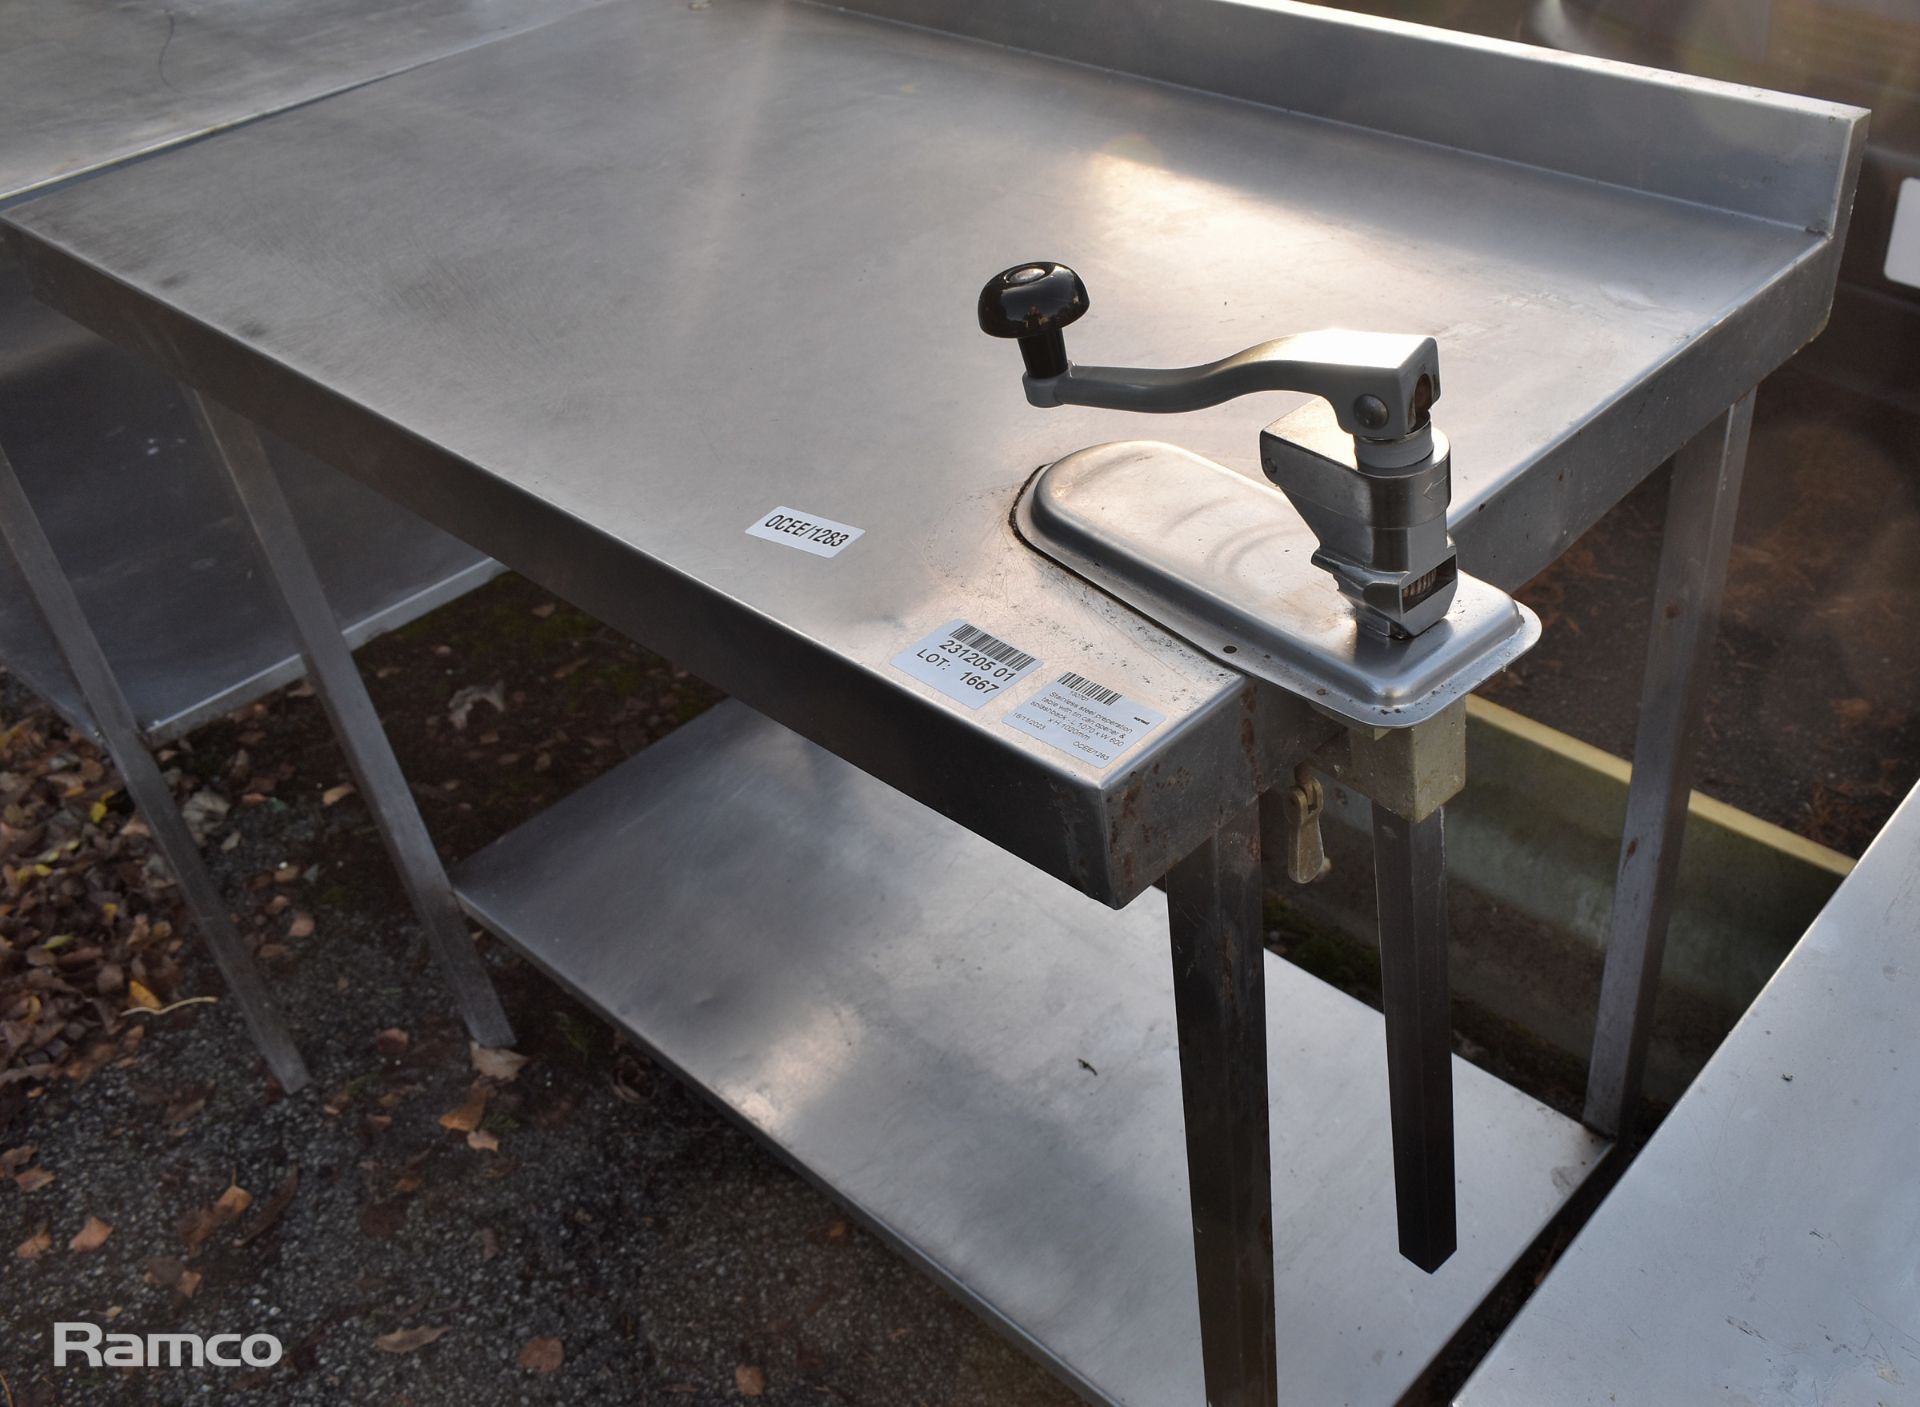 Stainless steel preparation table with tin can opener & splashback - L 1070 x W 600 x H 1020mm - Image 3 of 3